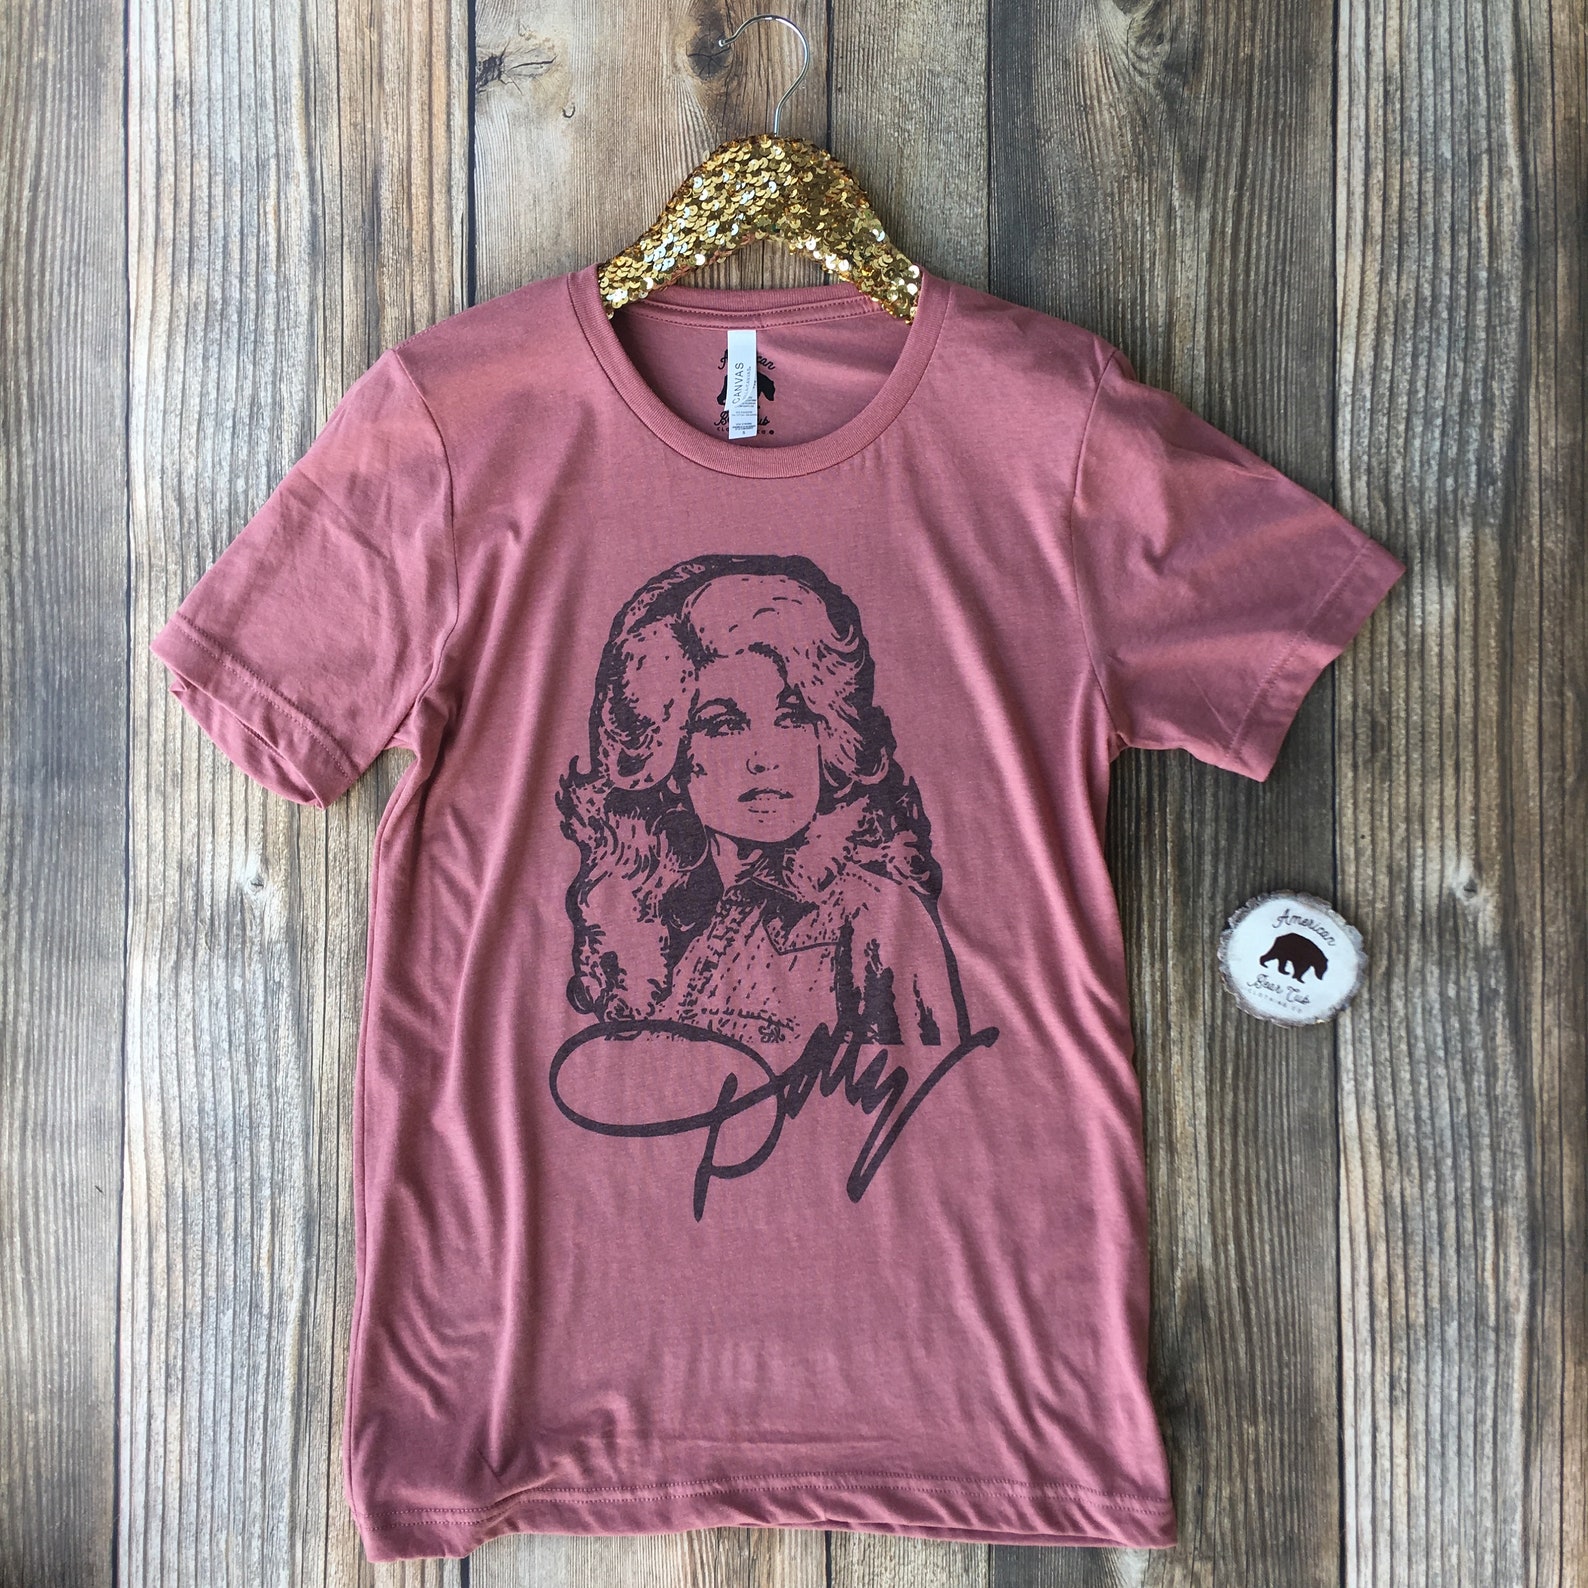 Dolly Parton Shirt Plus Size Clothing Available Country | Etsy